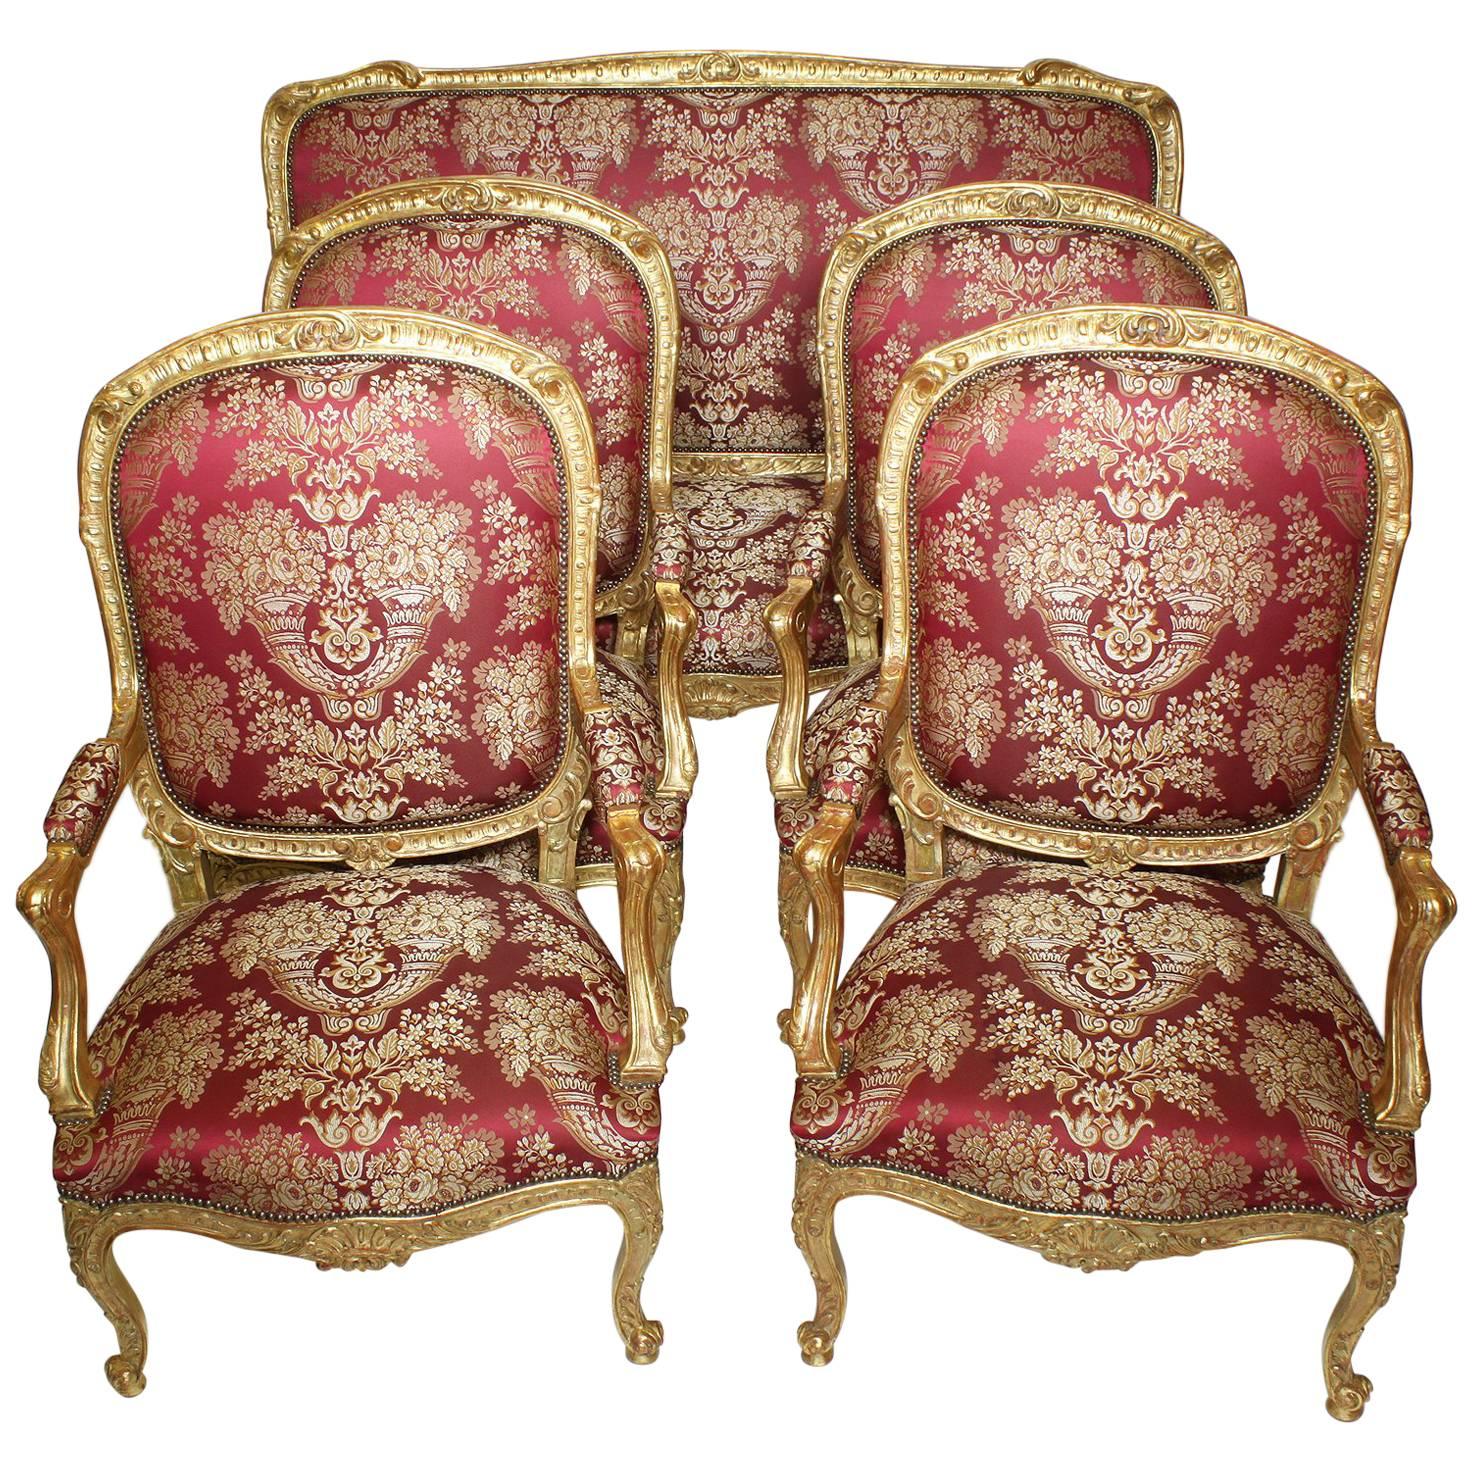 Palatial 19th Century Louis XV Style Giltwood Carved Five-Piece Salon Suite